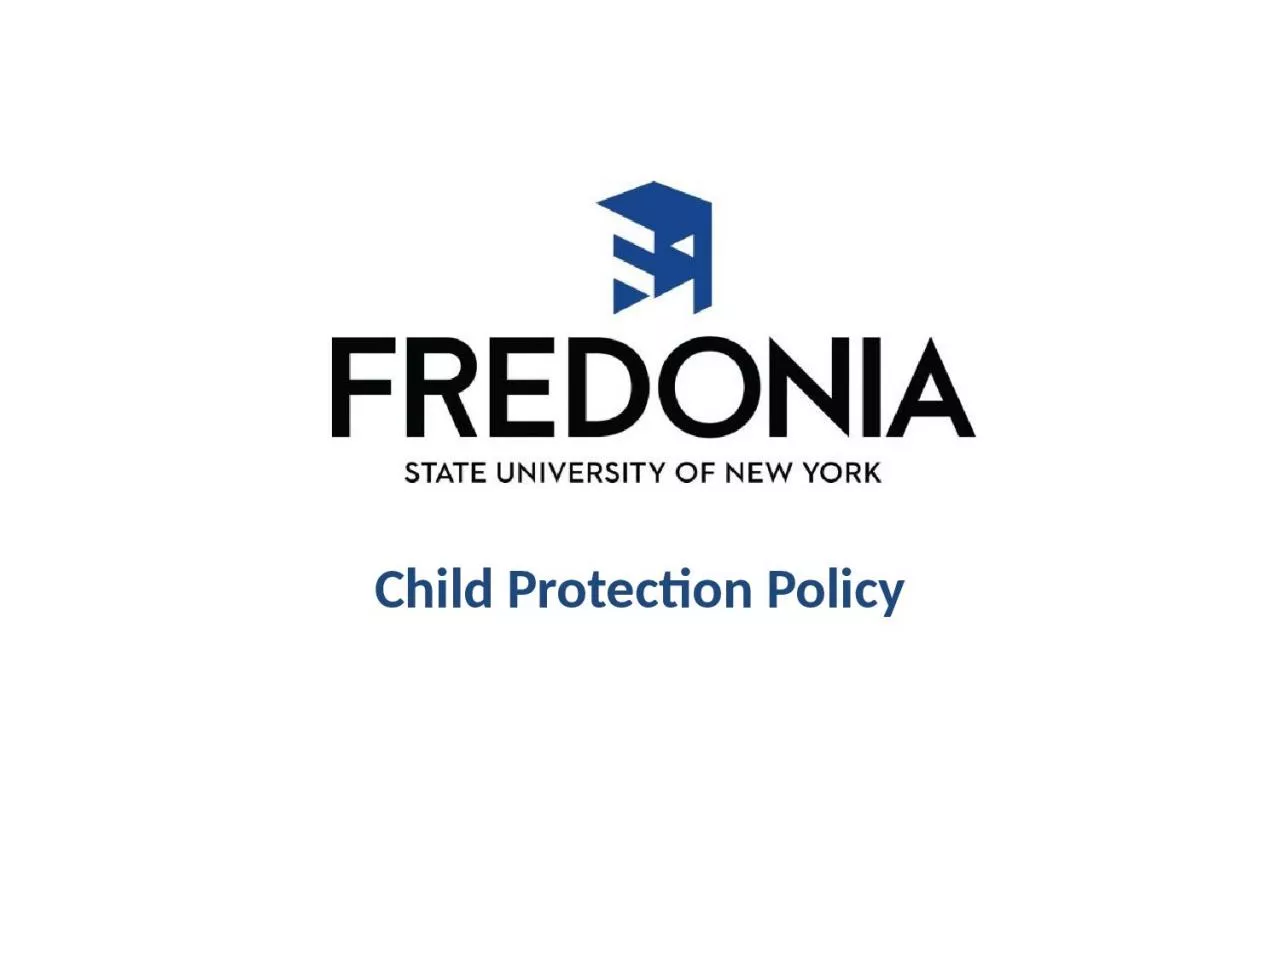 Child Protection Policy Introduction